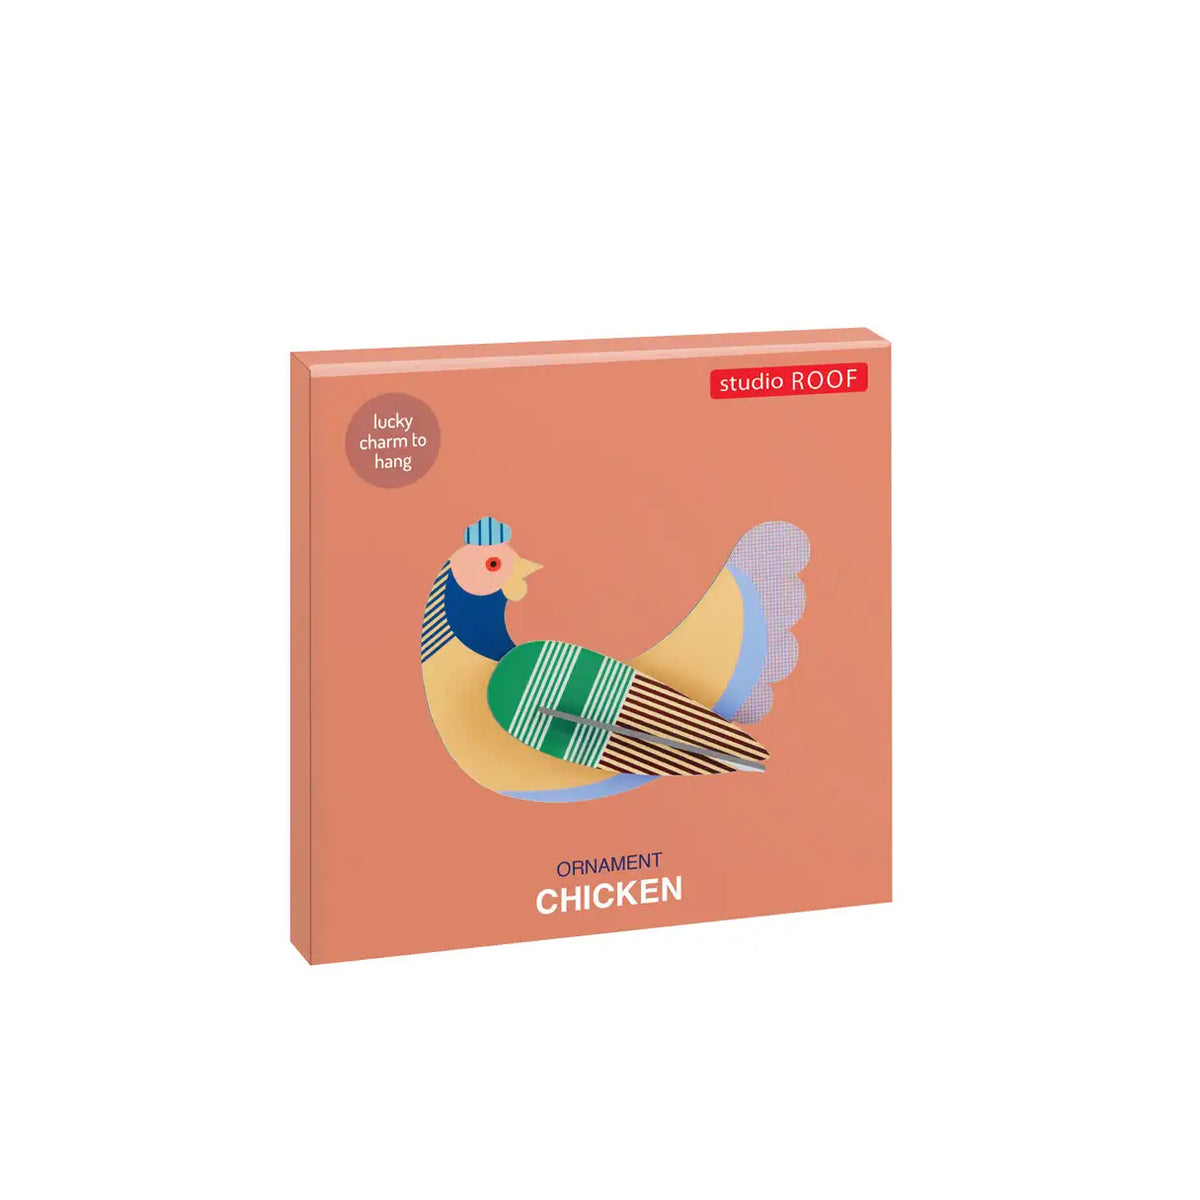 CHICKEN_ORNAMENT-LUCKY-CHARM_Studio-Roof_MOCKUP-PACKAGING_PICTURE